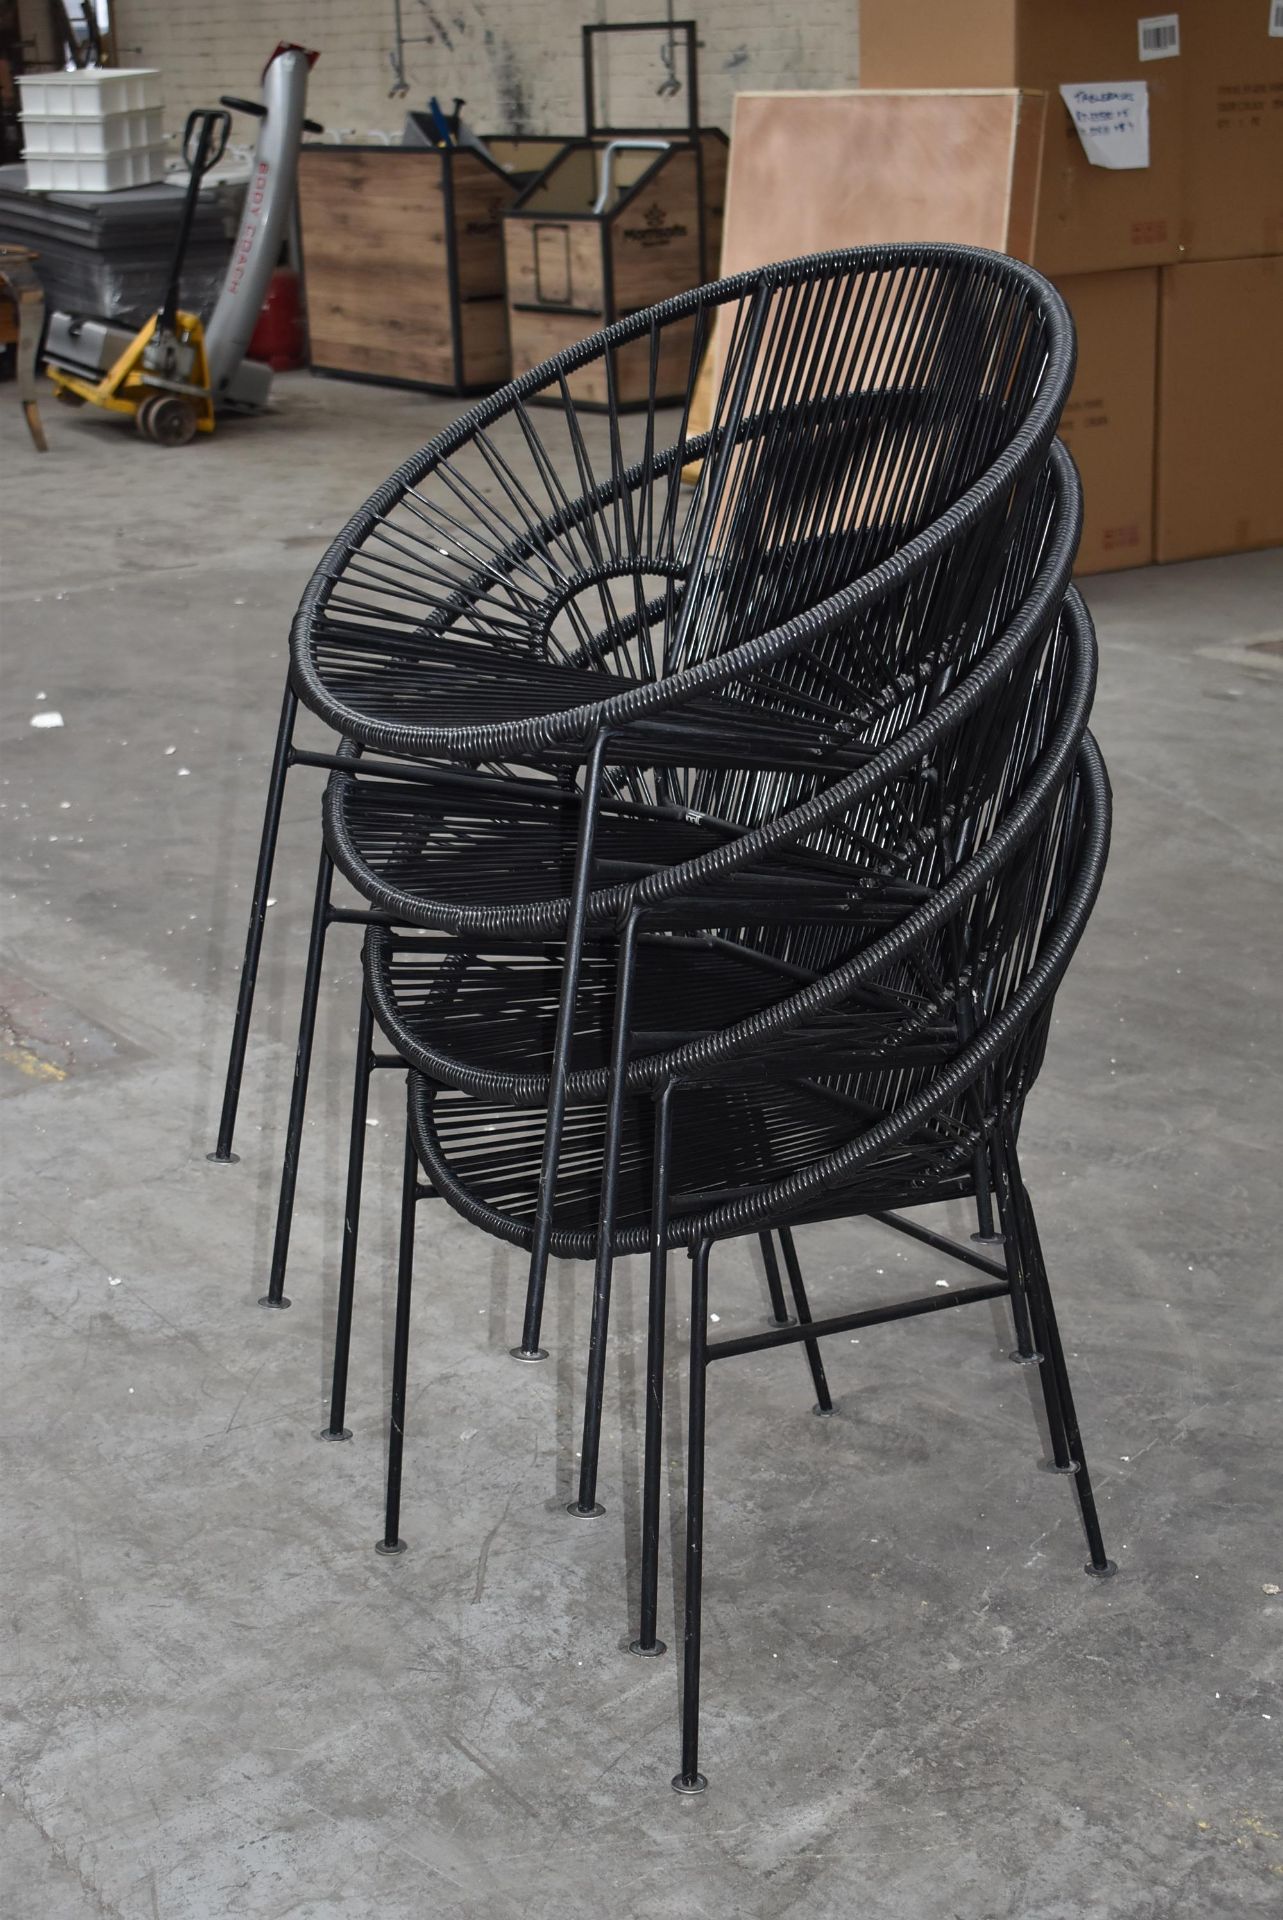 4 x Innit Designer Chairs - Acapulco Style Chairs in Black Suitable For Indoor or Outdoor Use - - Image 3 of 9